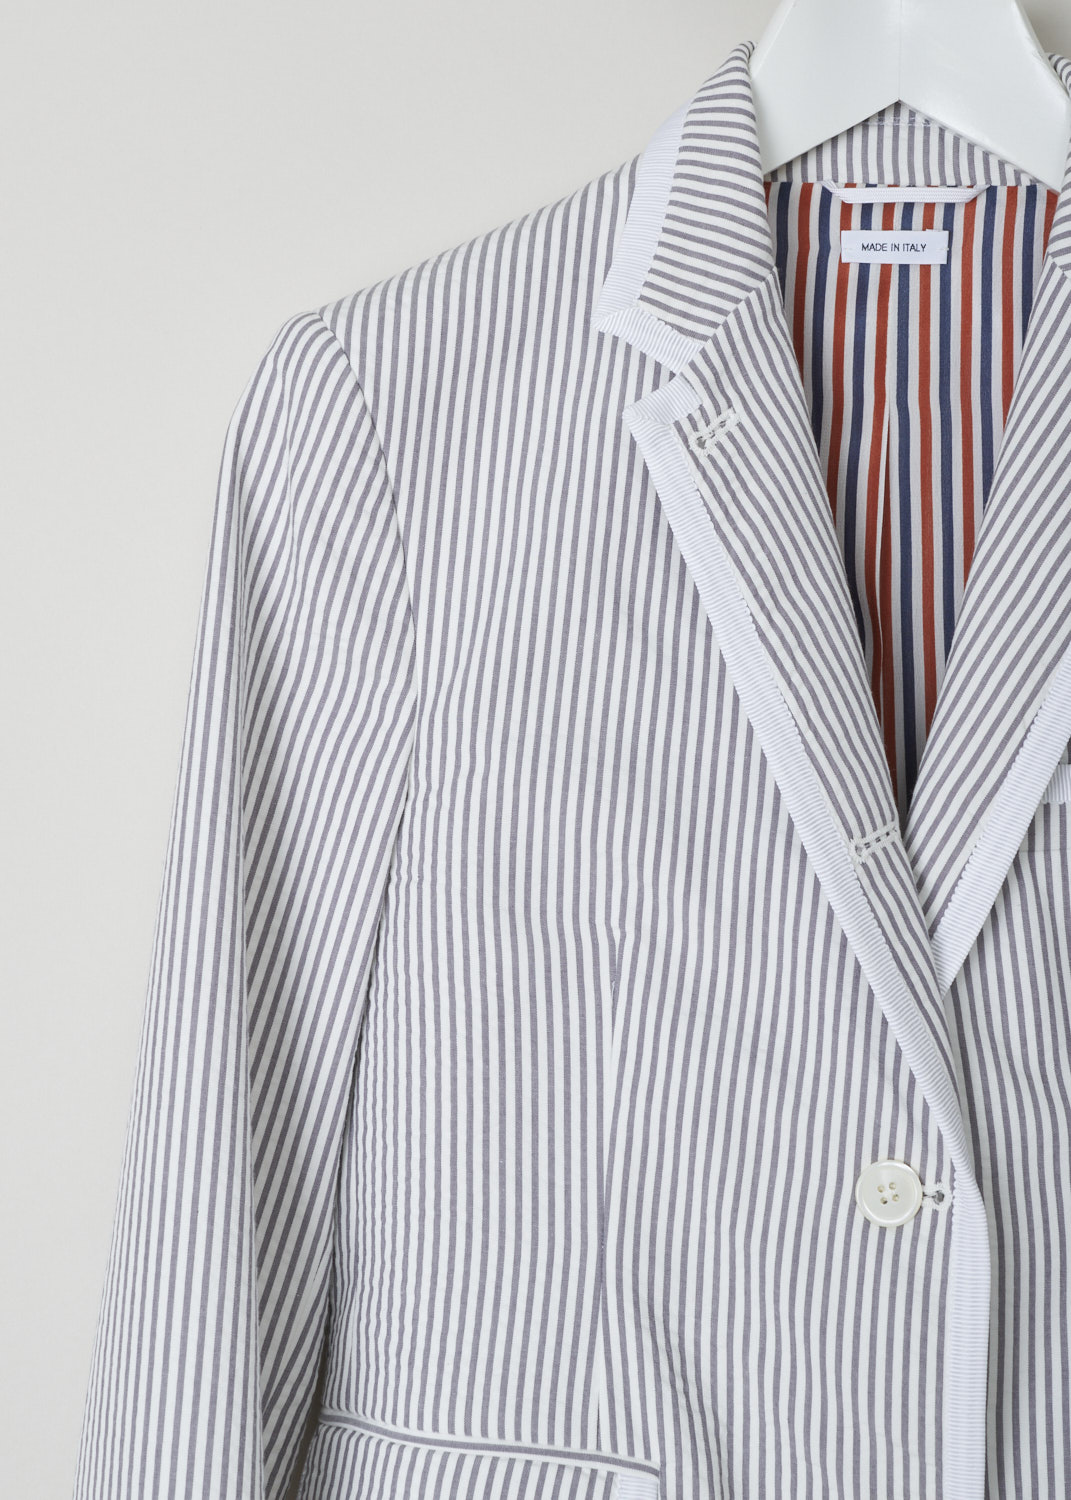 Thom Browne, white and grey striped blazer, FBC492B_00572_035, white grey, detail, Classic blazer reimagined with the seersucker cotton fabric, and the lovely striped motif. Featuring a collar that leads into the notched lapel, further decorating the front are two flap pockets and a single chest pocket. A notable feature here is that all the edges and hems are adorned with a white trim. On the back you will find two off-center splits. 